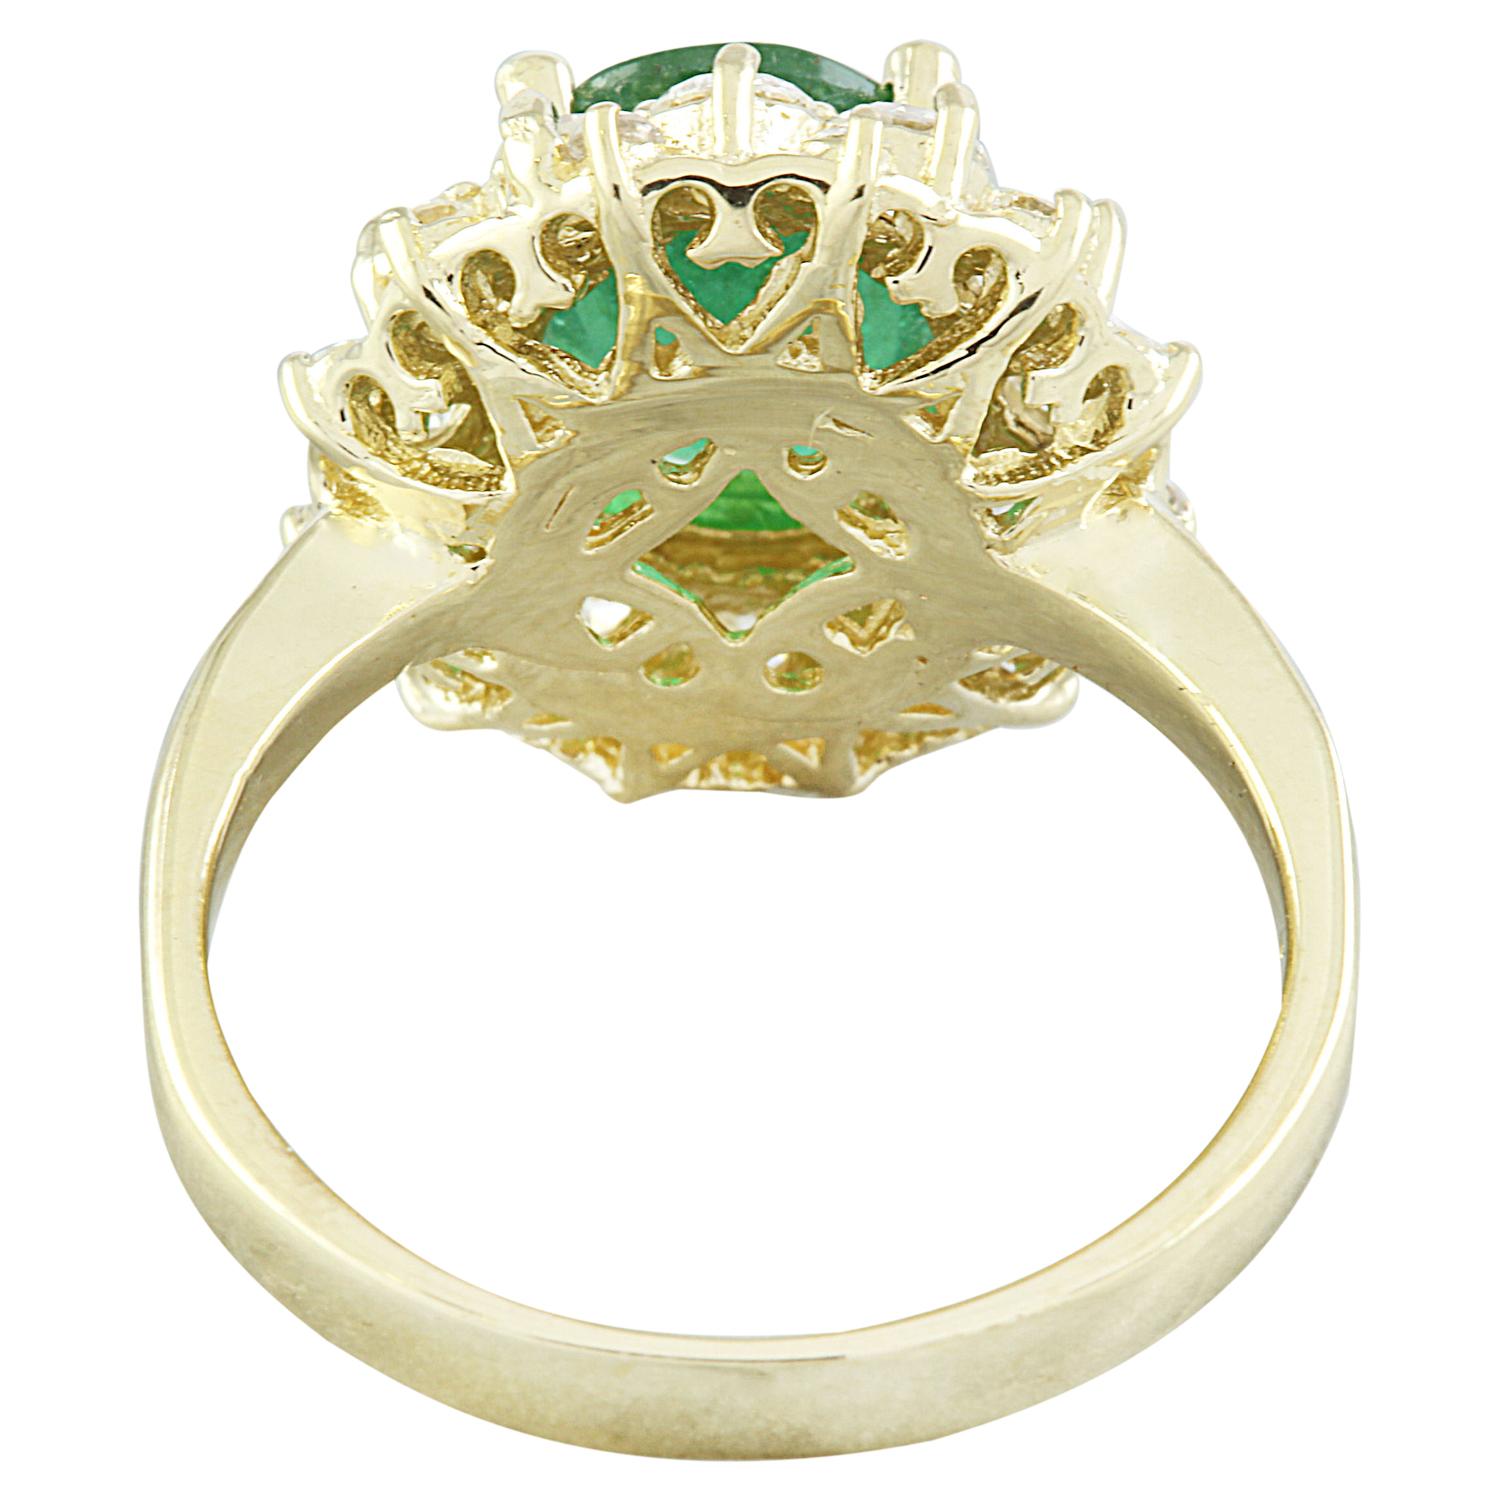 Oval Cut Luxurious Natural Emerald Diamond Ring in 14K Solid Yellow Gold For Sale